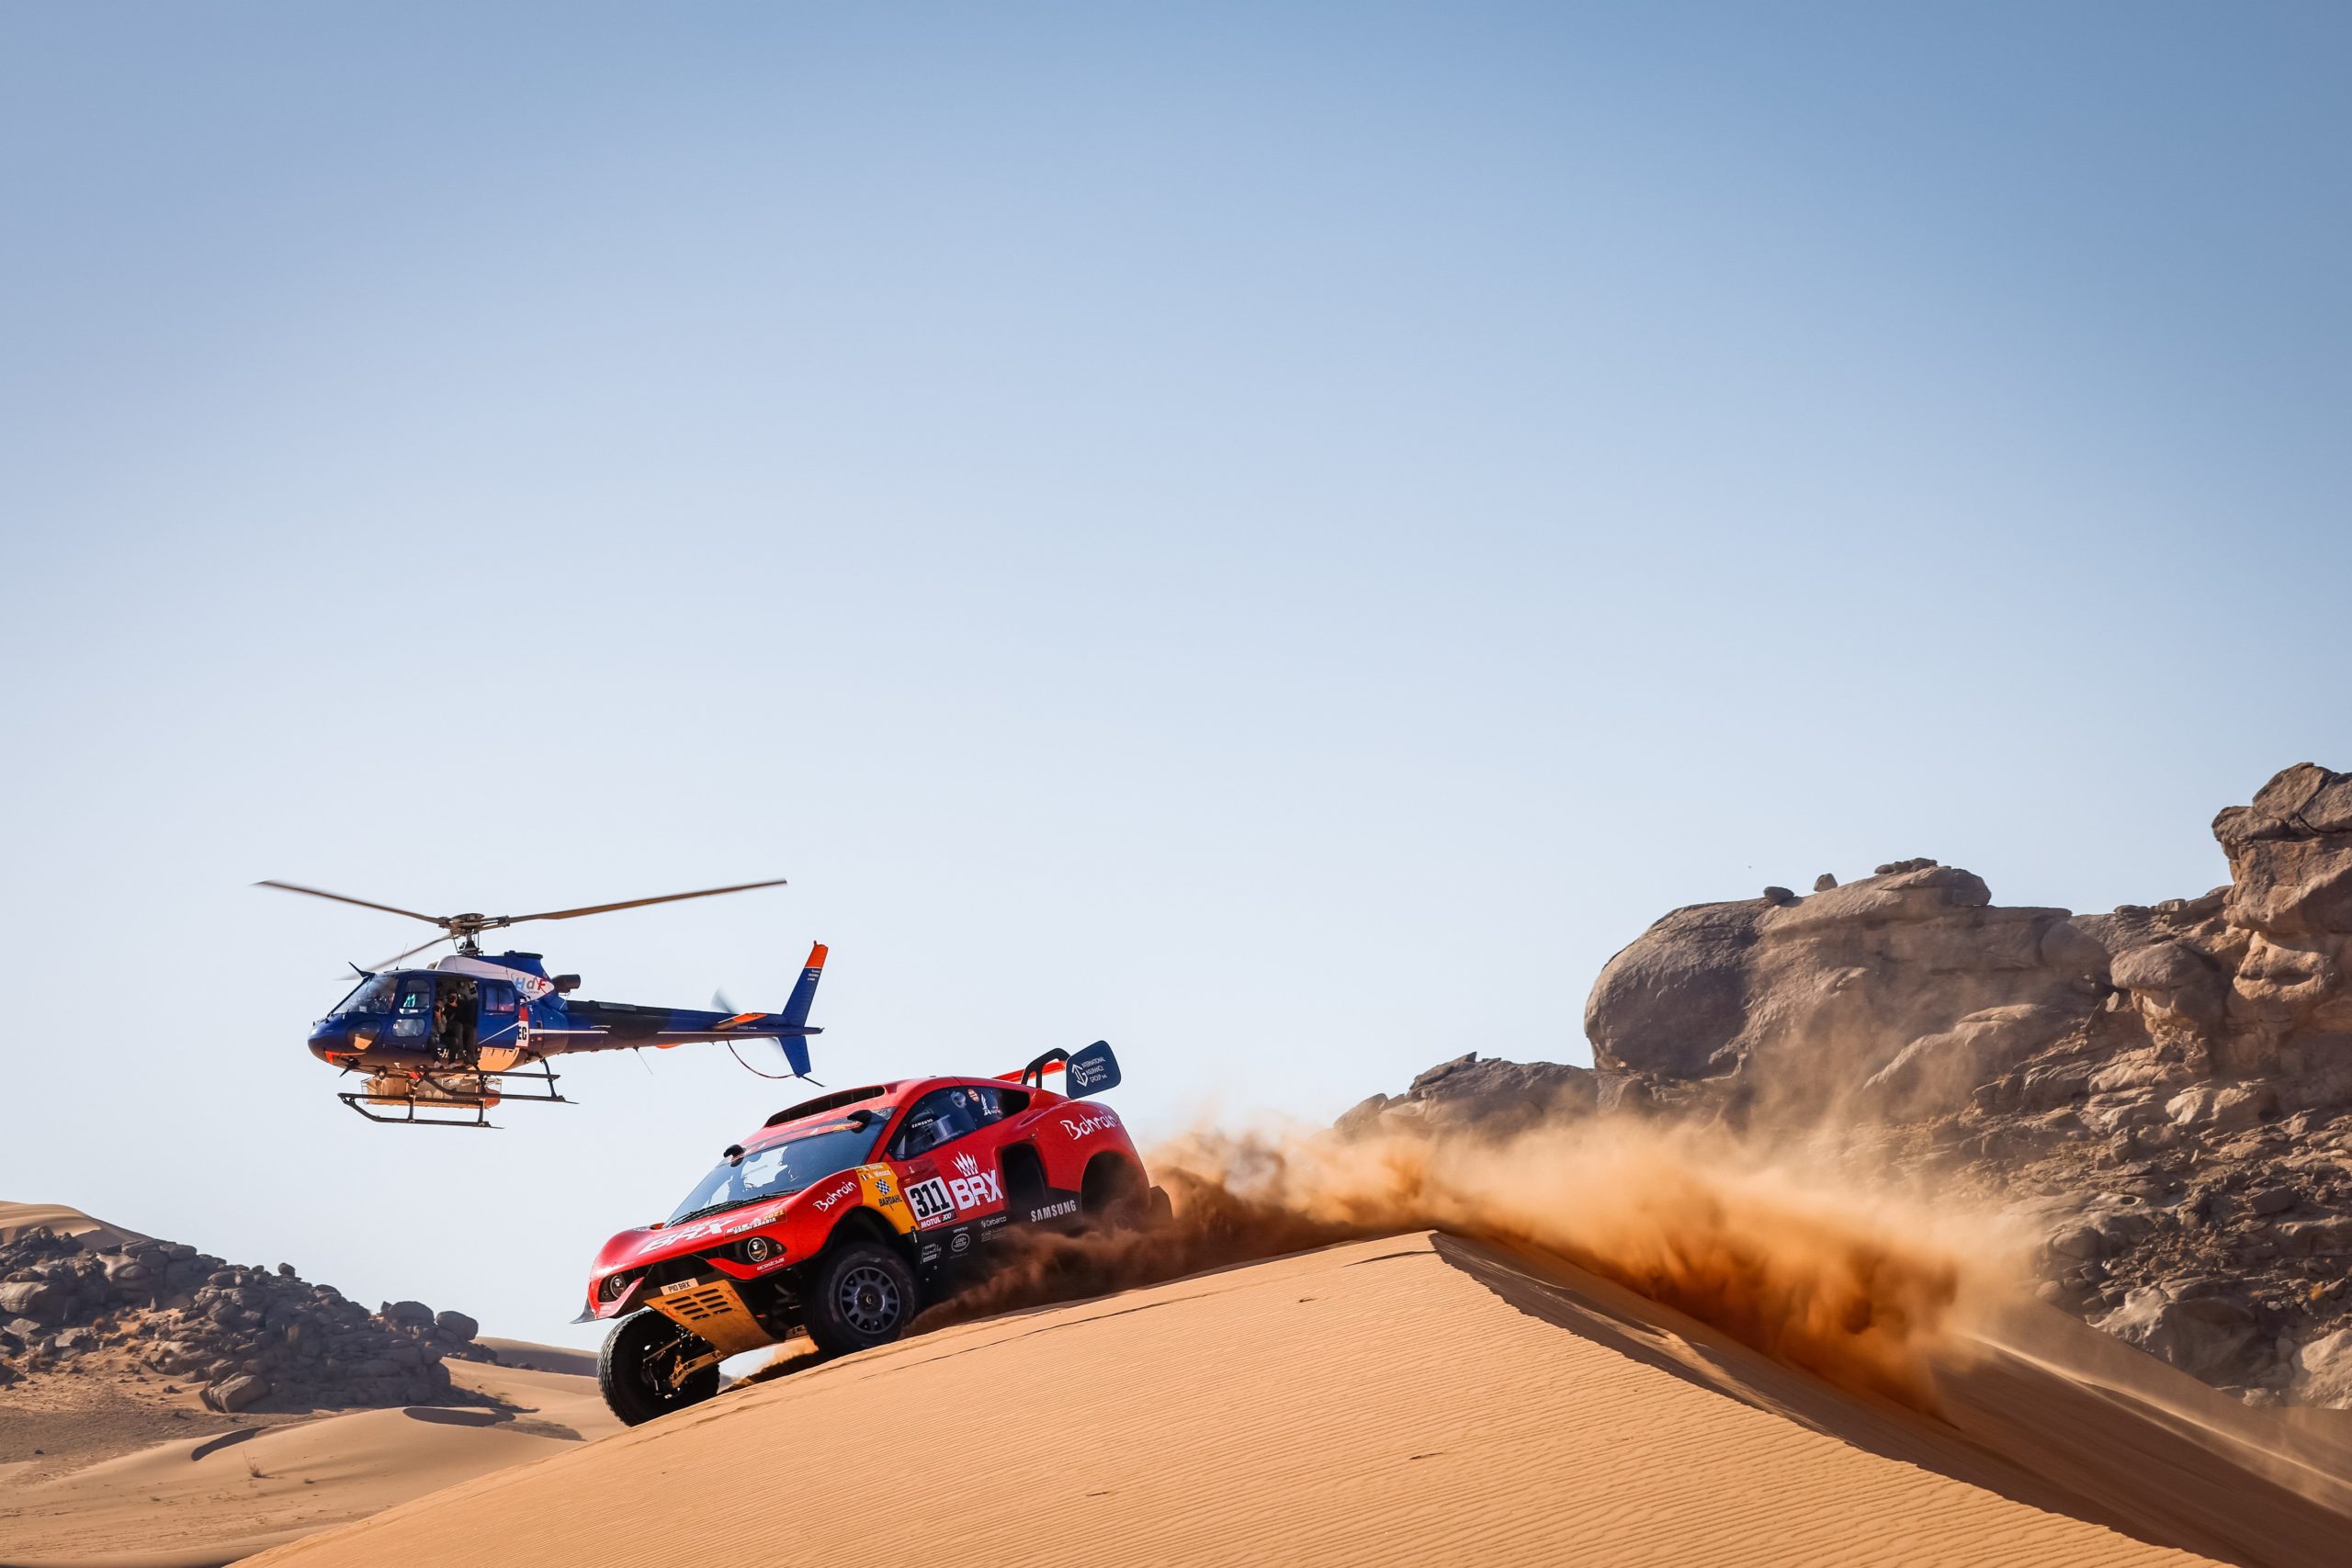 311 Roma Nani (esp), Winocq Alexandre (fra), Hunter, Bahrain Raid Extreme, BRX, Auto, action during the 2nd stage of the Dakar 2021 between Bisha and Wadi Al Dawasir, in Saudi Arabia on January 4, 2021 - Photo Frédéric Le Floc’h / DPPI